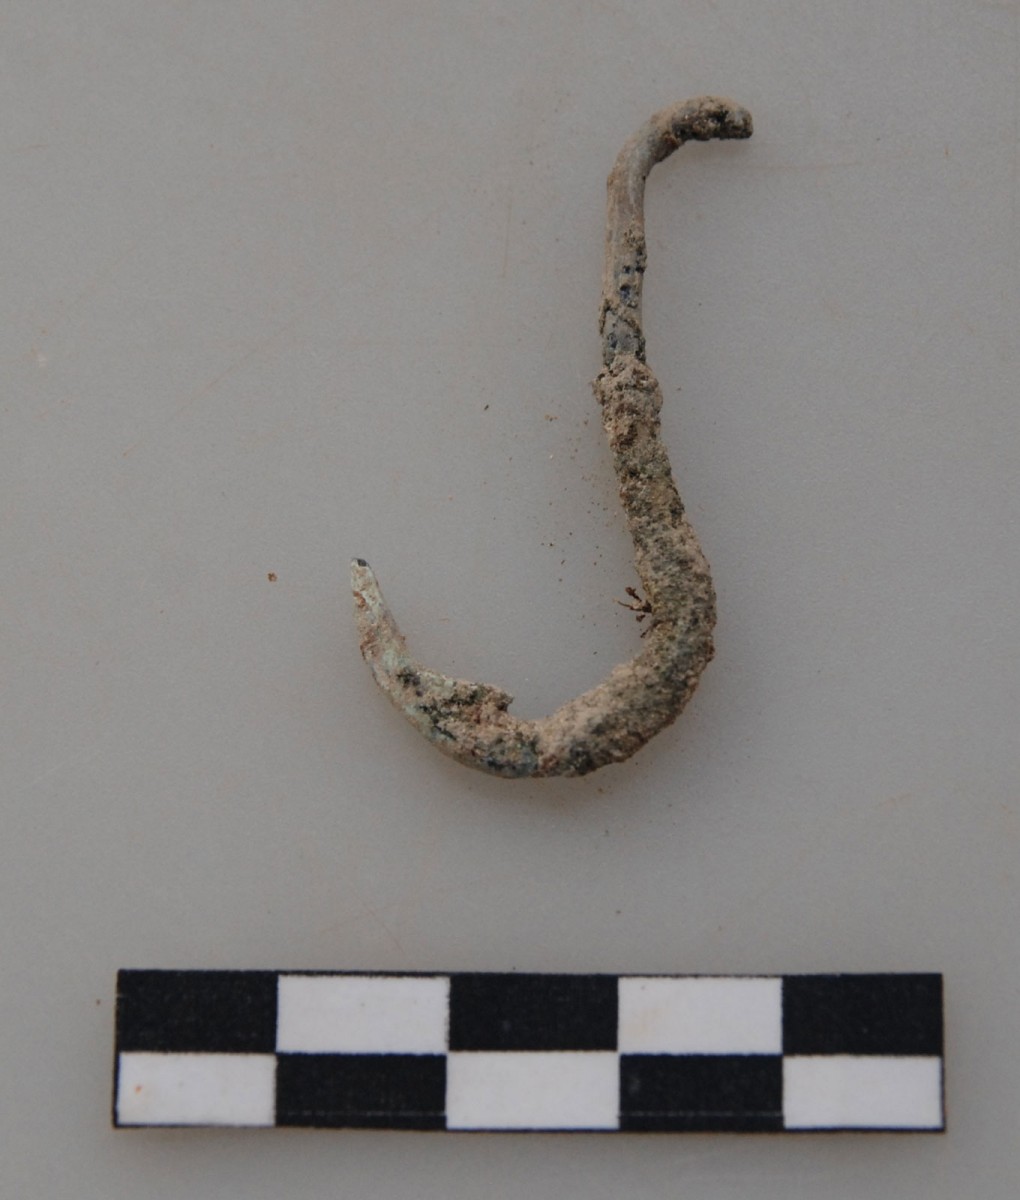 Fig. 5. Metal object from a grave revealed during the rescue excavation at the “Rema Xydias” in Platamonas (Pieria, Greece). Photo: Ephorate of Antiquities of Pieria